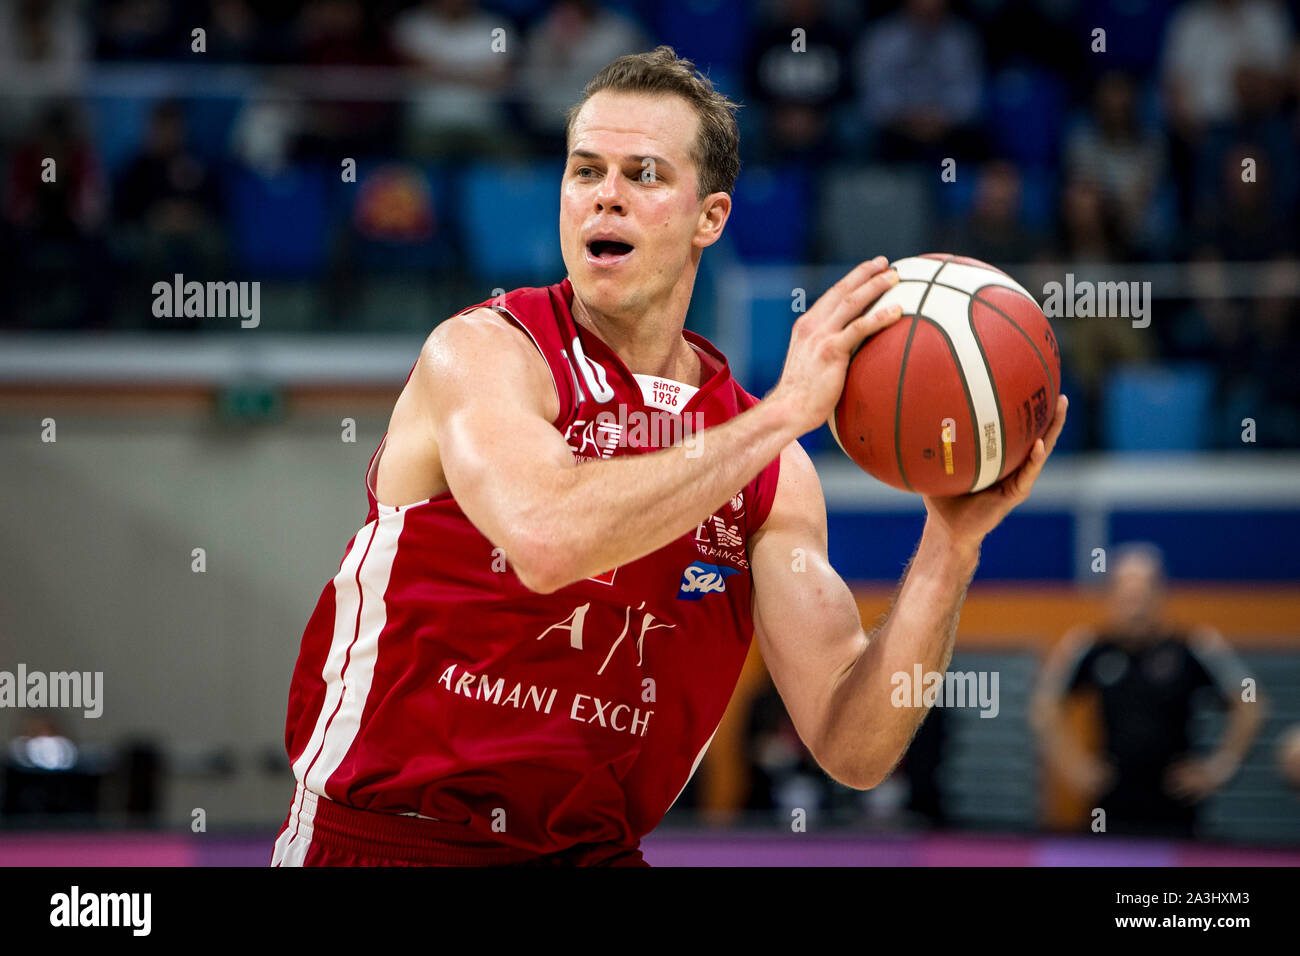 Milano, Italy. 07th Oct, 2019. Michael Roll (AX Armani Exchange Olimpia Milano) during Legabasket Serie A basketball match AX Armani Exchange Olimpia Milano vs Pallacanestro Trieste in Milano, Palalido Allianz Cloud, the home team won 88-74. Italy 6th October 2019. (Photo by Matteo Cogliati/Pacific Press) Credit: Pacific Press Agency/Alamy Live News Stock Photo